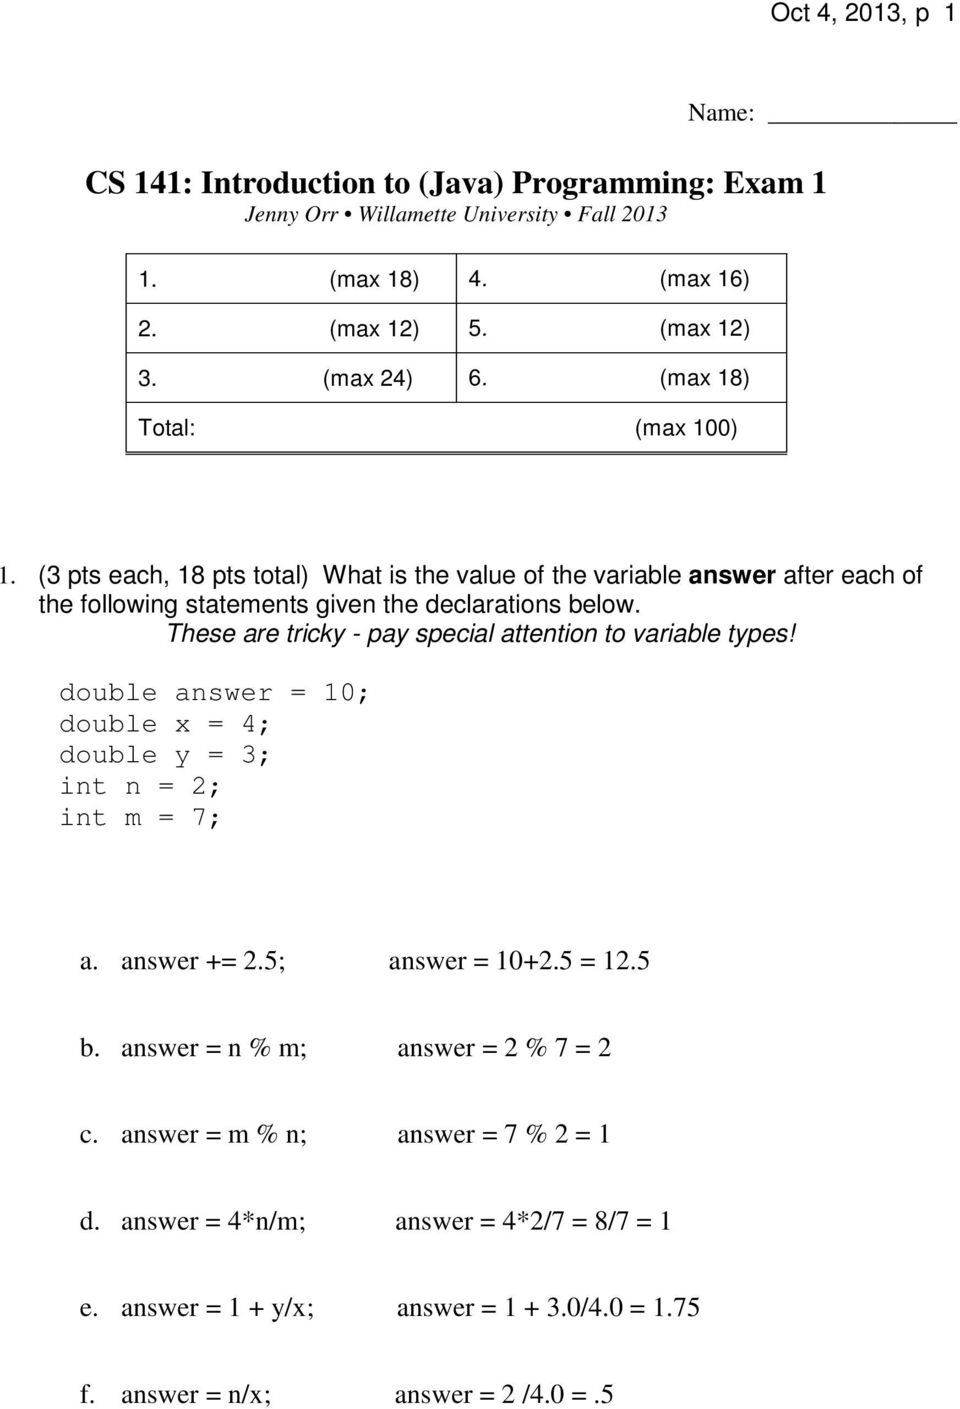 These are tricky - pay special attention to variable types! double answer = 10; double x = 4; double y = 3; int n = 2; int m = 7; a. answer += 2.5; answer = 10+2.5 = 12.5 b.